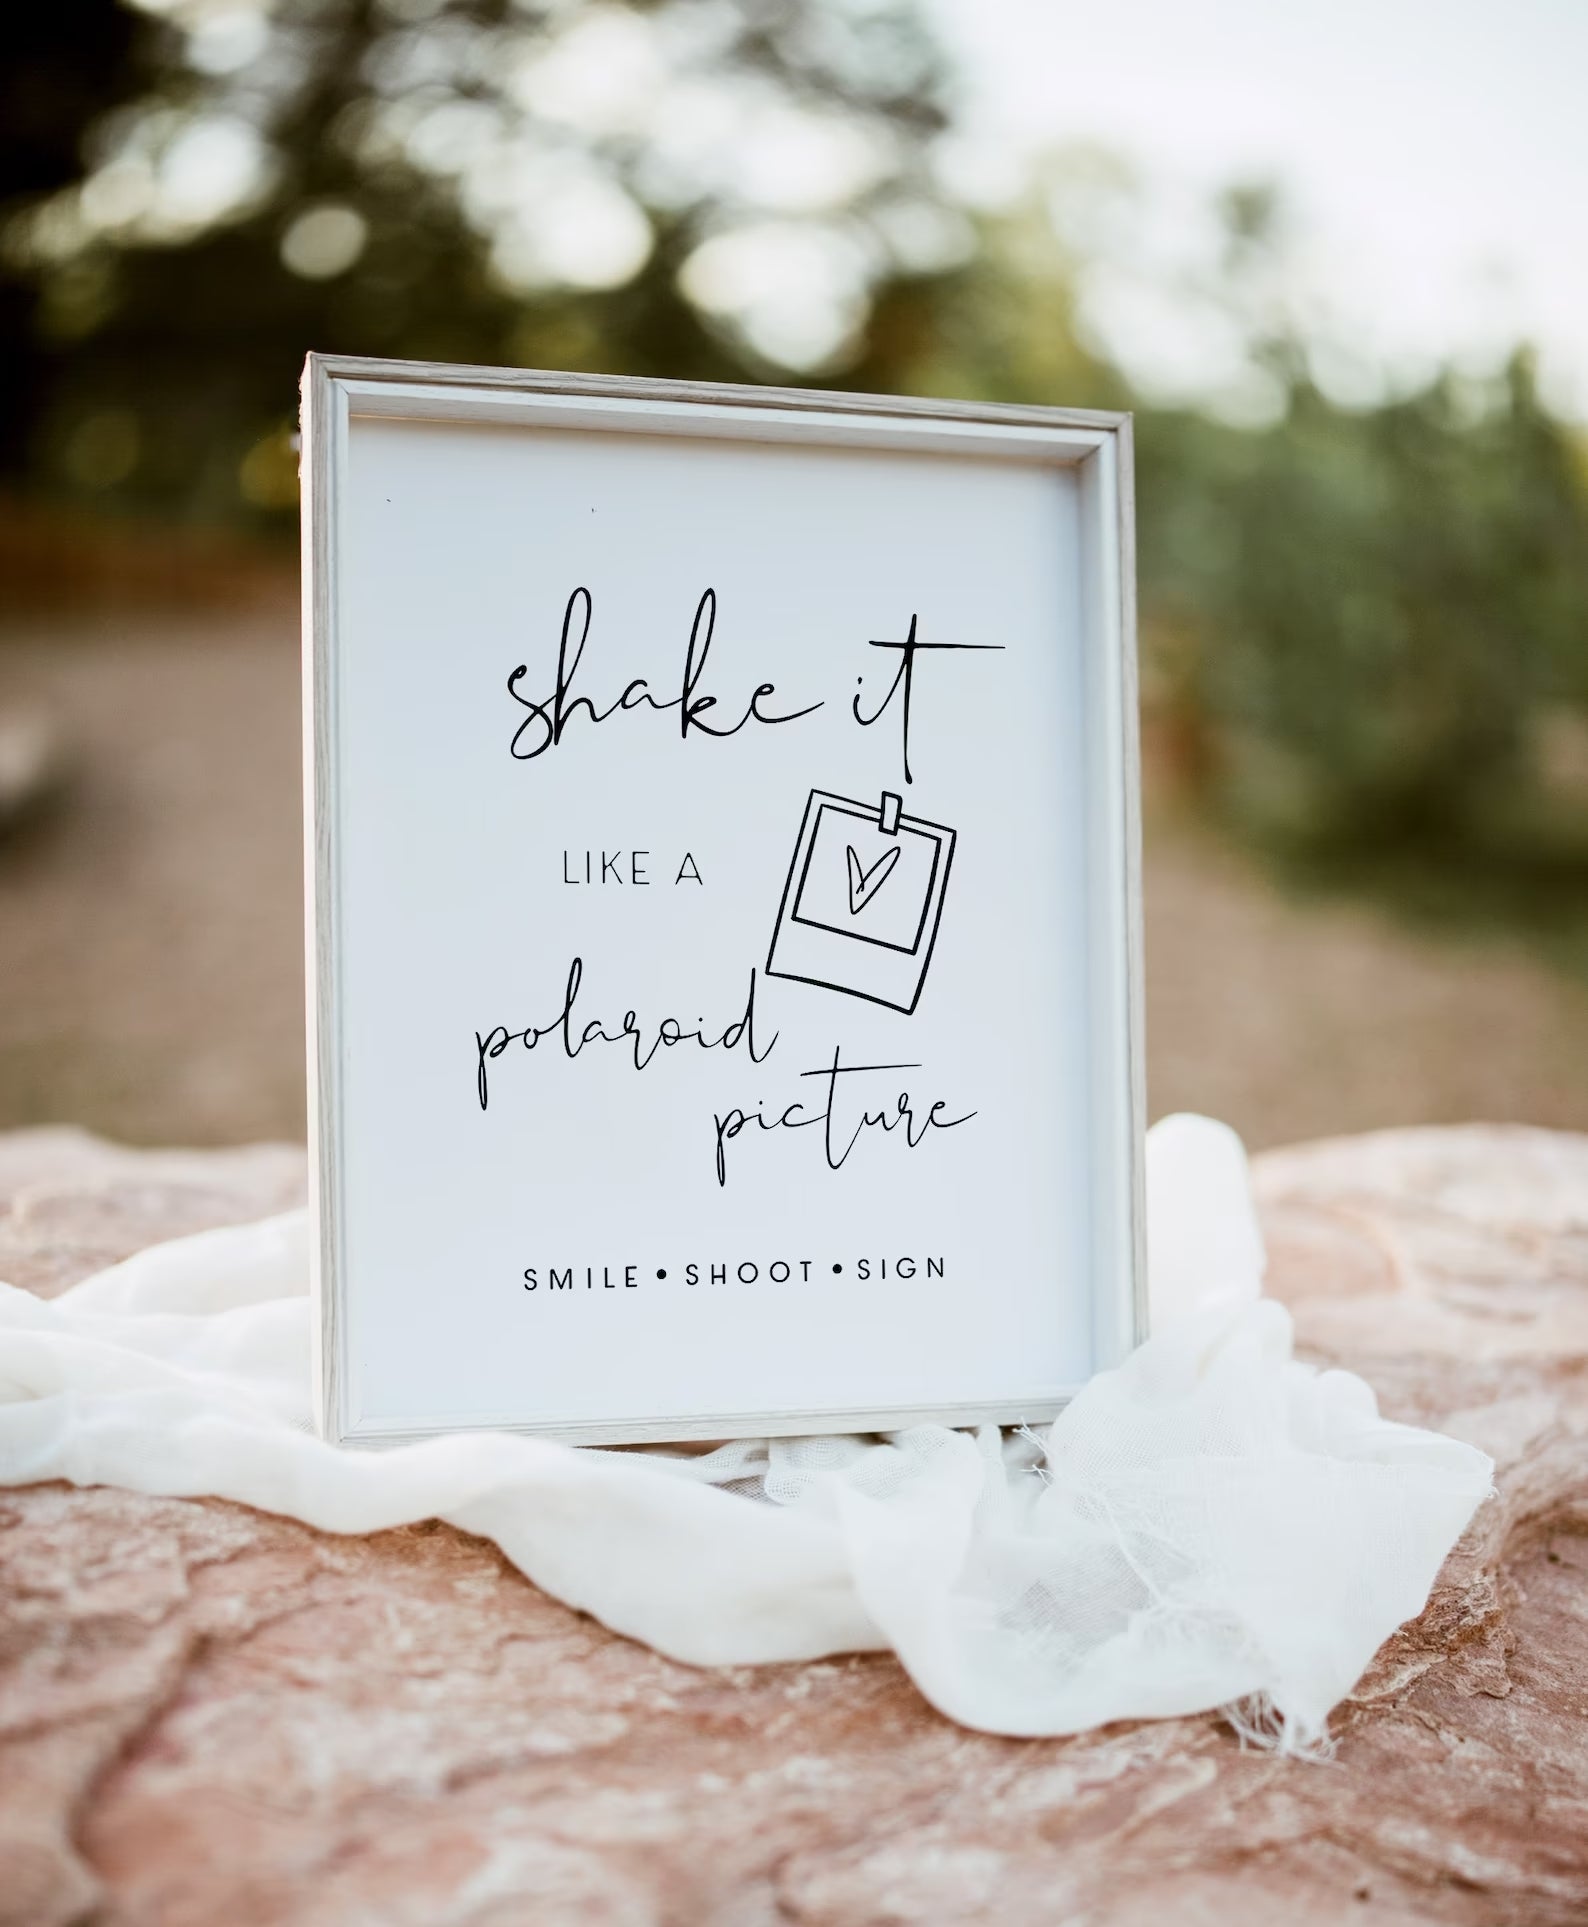 How to Set Up a Polaroid Guest Book Station